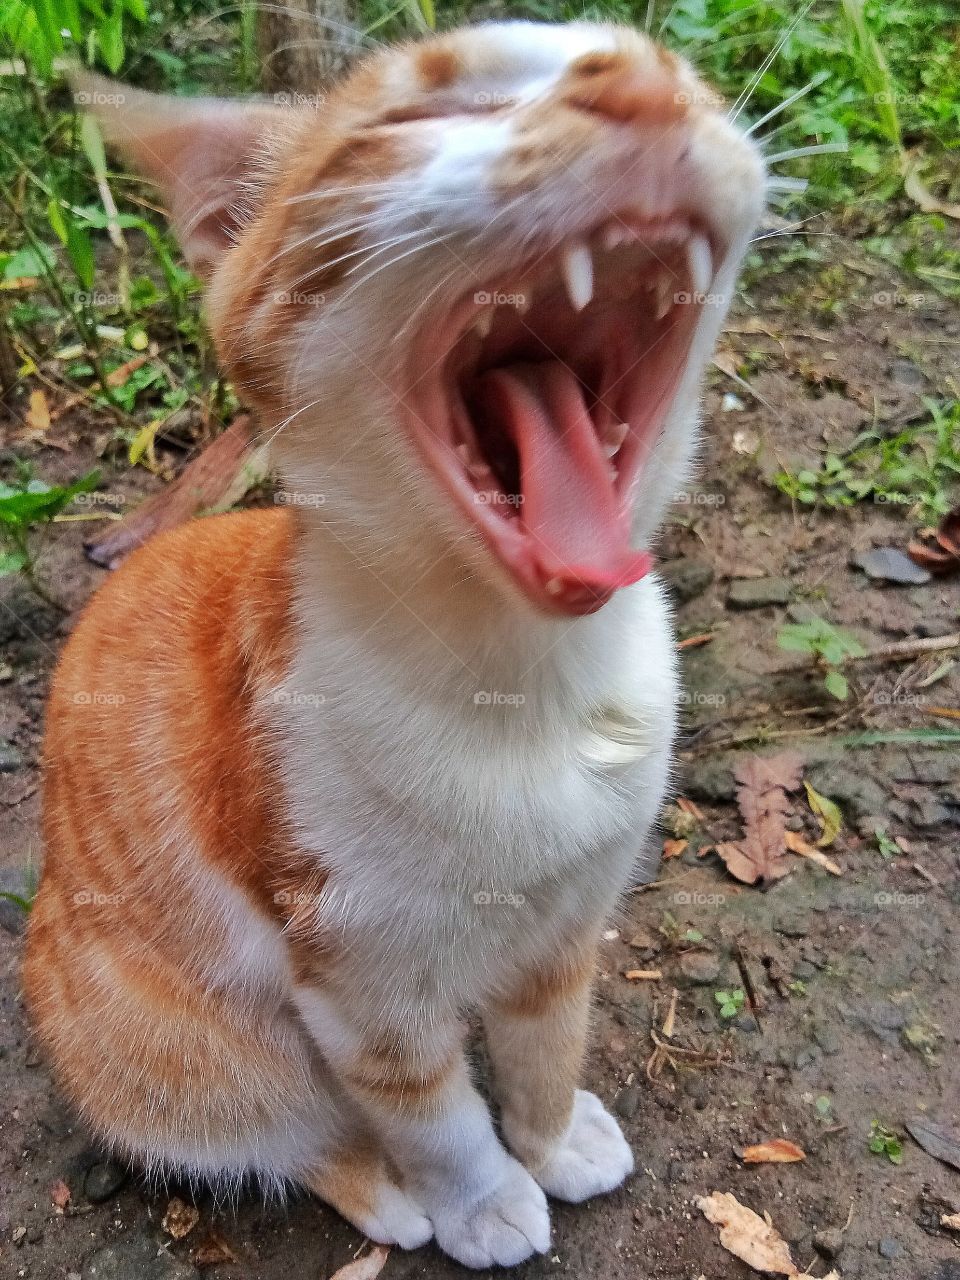 It's a shame to take a picture of this cat when the cat is yawning. It seems drowsy, the most important thing is that it is difficult to take a photo of a cat who is opening his mouth. It takes several minutes or even hours to produce this photo.